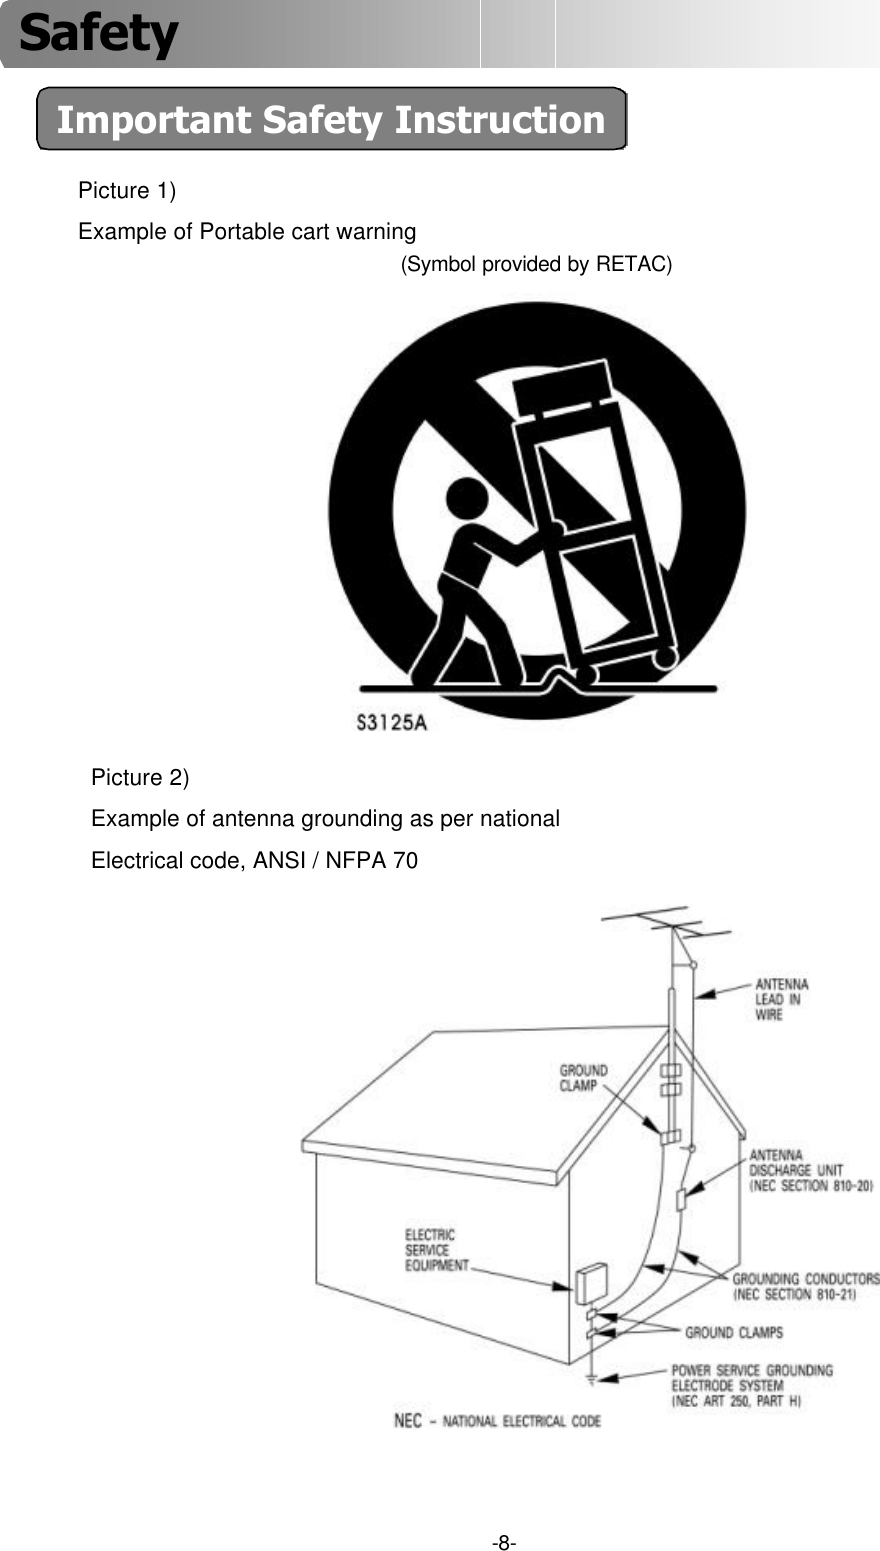 -8-Important Safety InstructionPicture 1)Example of Portable cart warning(Symbol provided by RETAC)Picture 2)Example of antenna grounding as per nationalElectrical code, ANSI / NFPA 70Safety